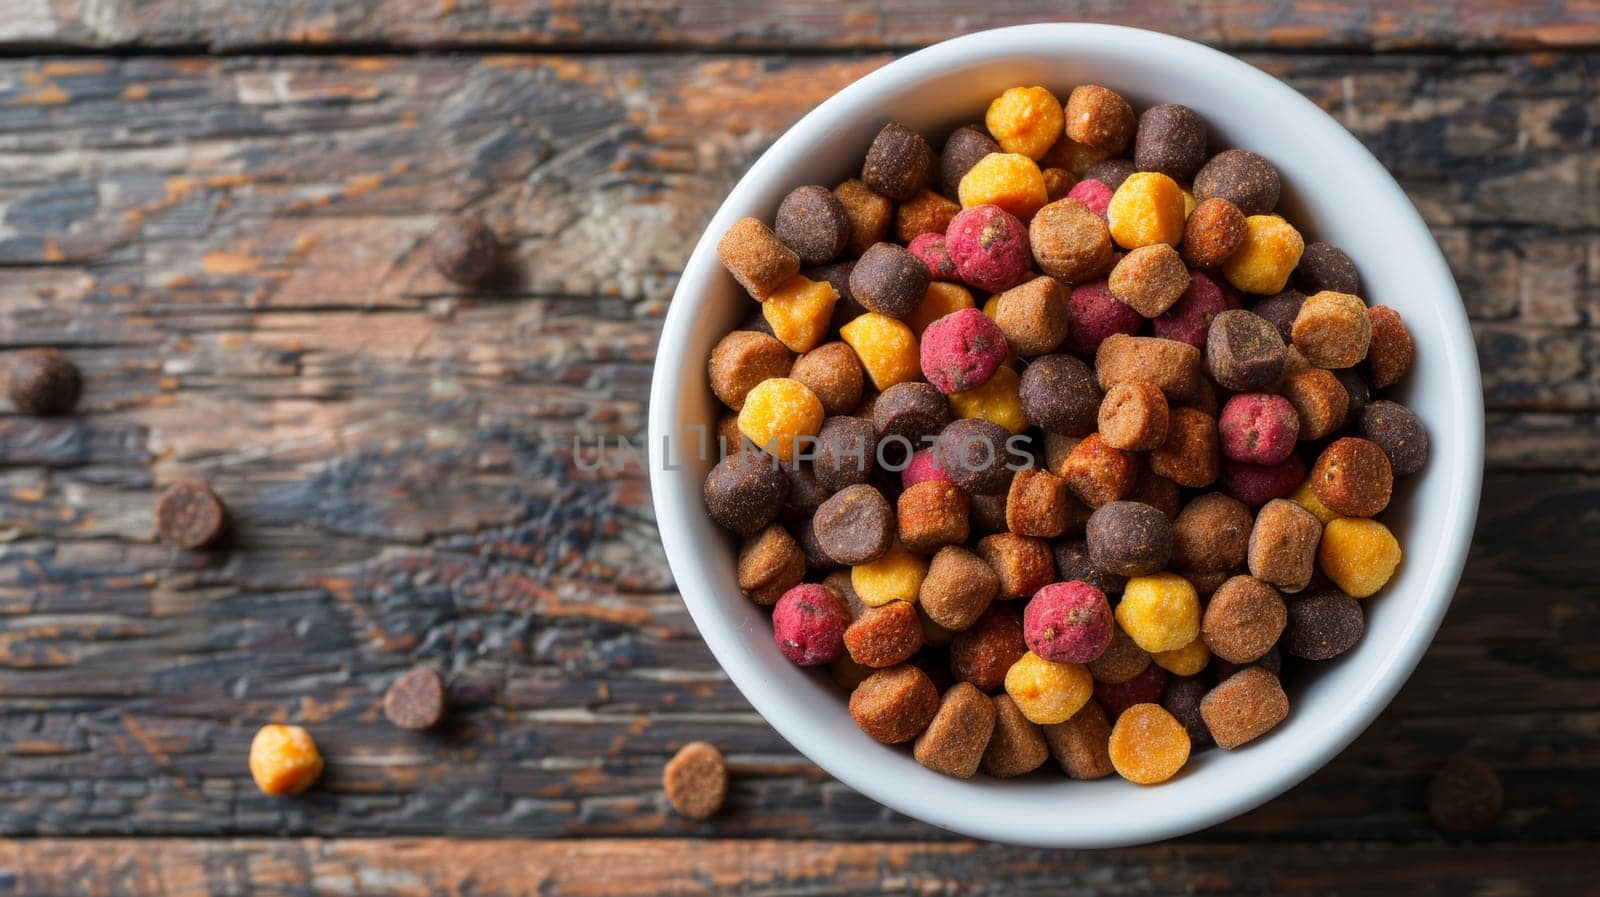 A bowl of dog food on a wooden table with other foods, AI by starush